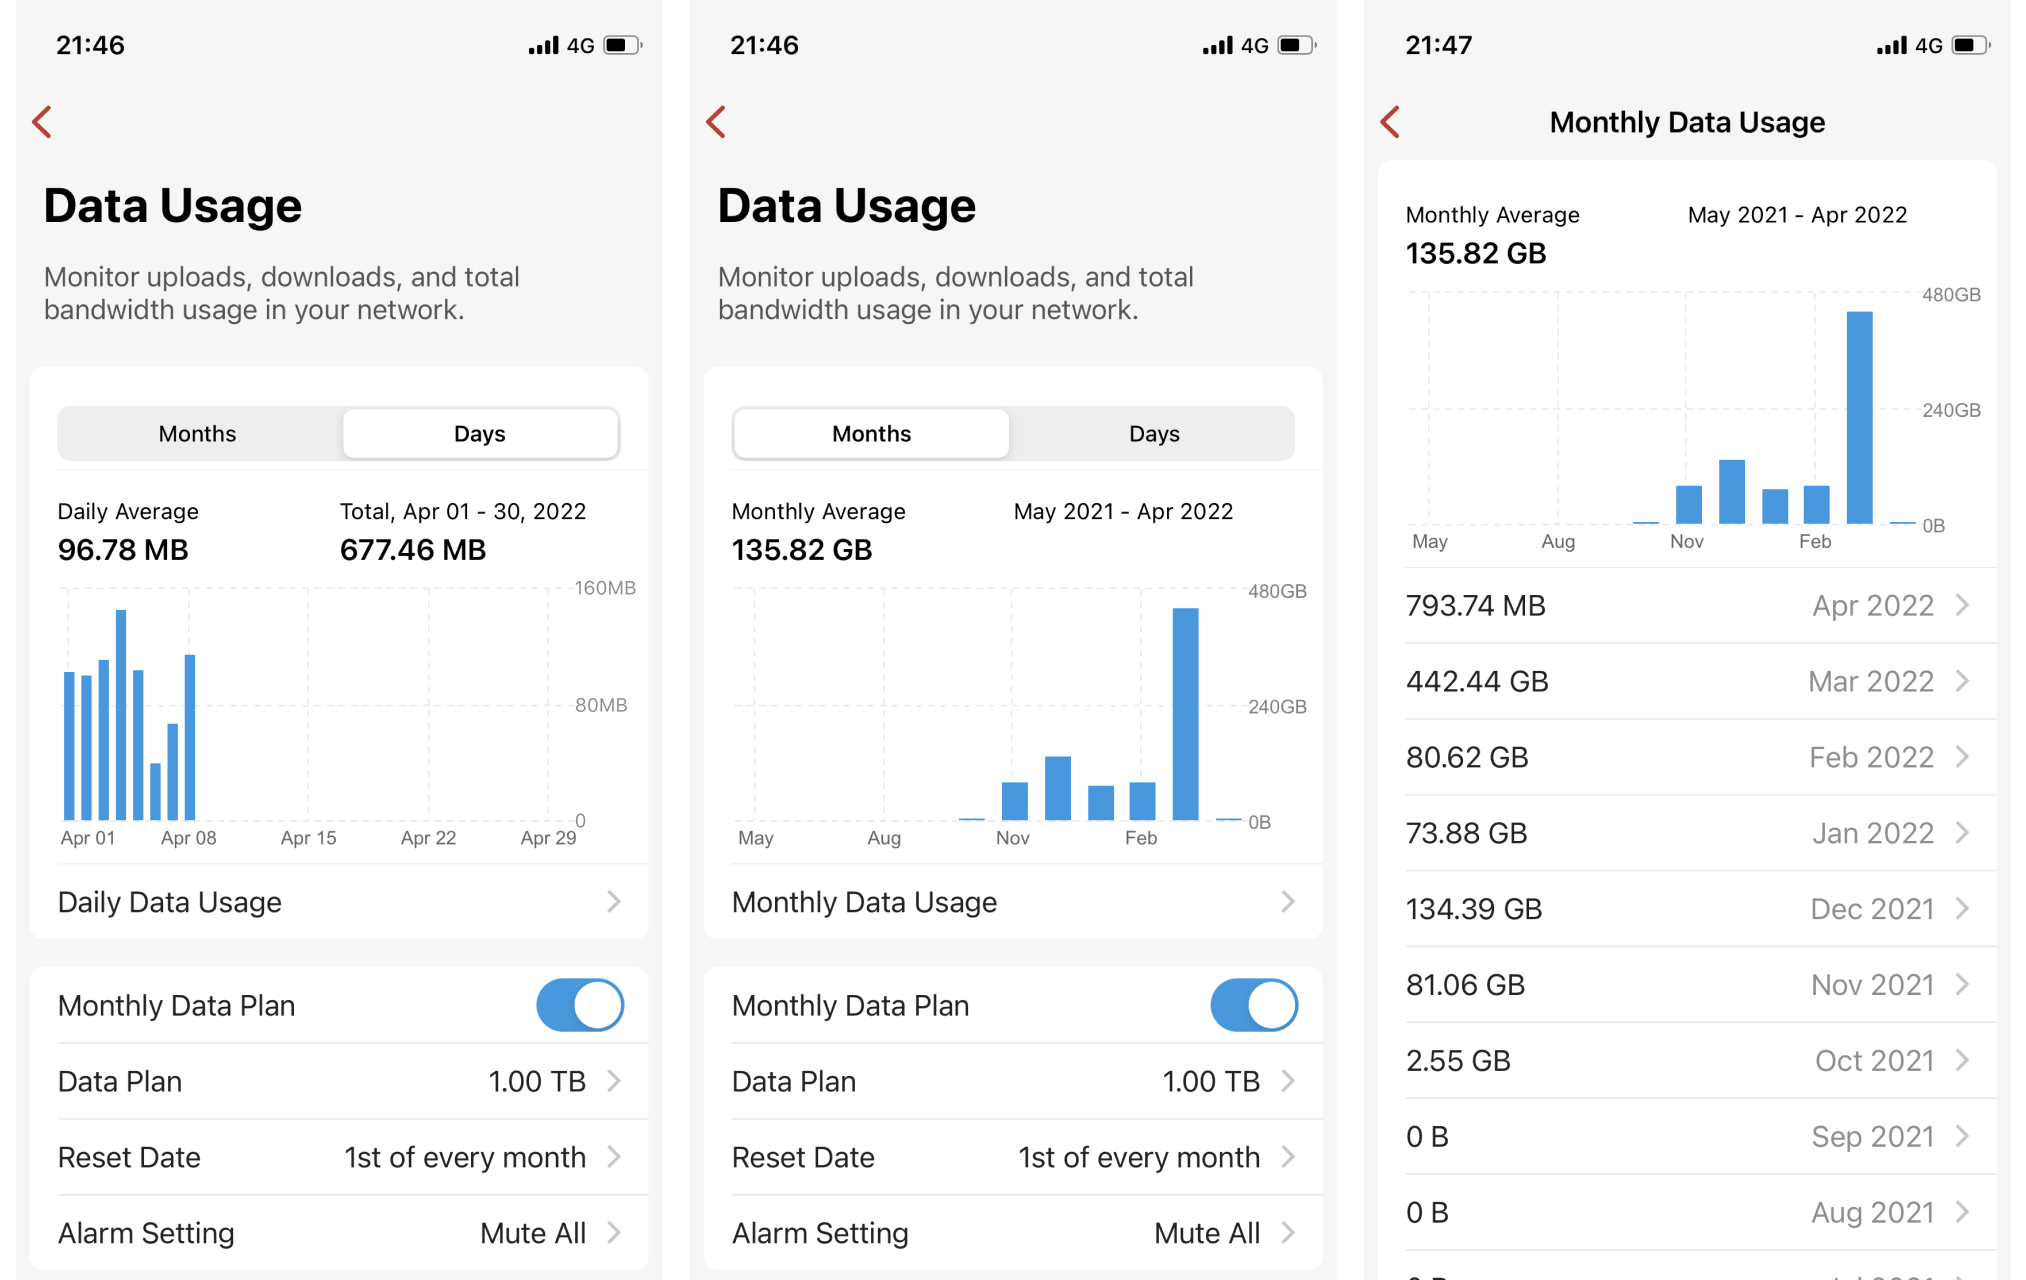 Secure your network by monitoring data usage or monthly data usage